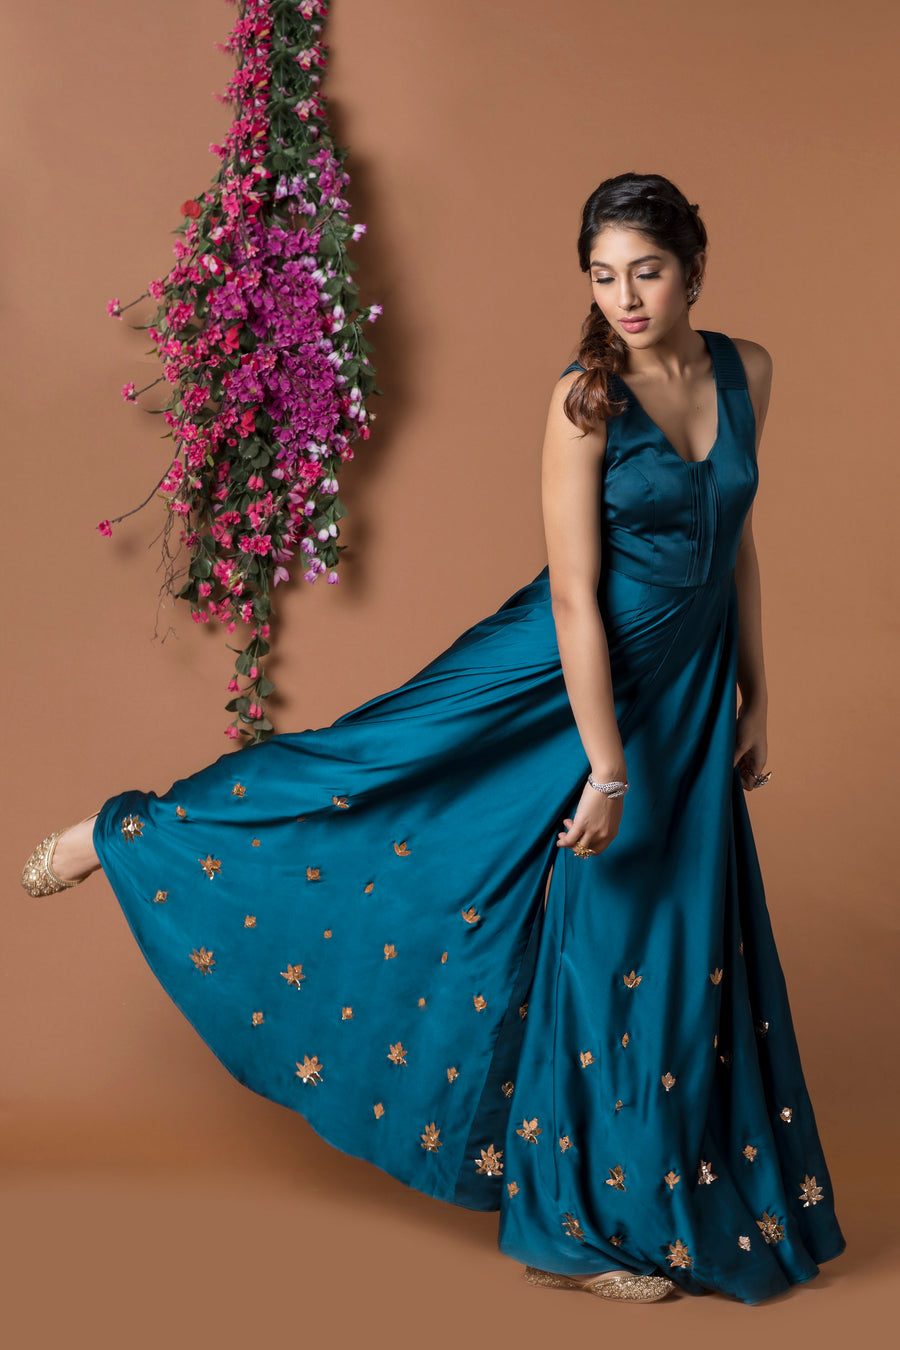 Womens Jumpsuits and Playsuits- Explore Ethnic Jumpsuits and Printed  Jumpsuits| Global Desi